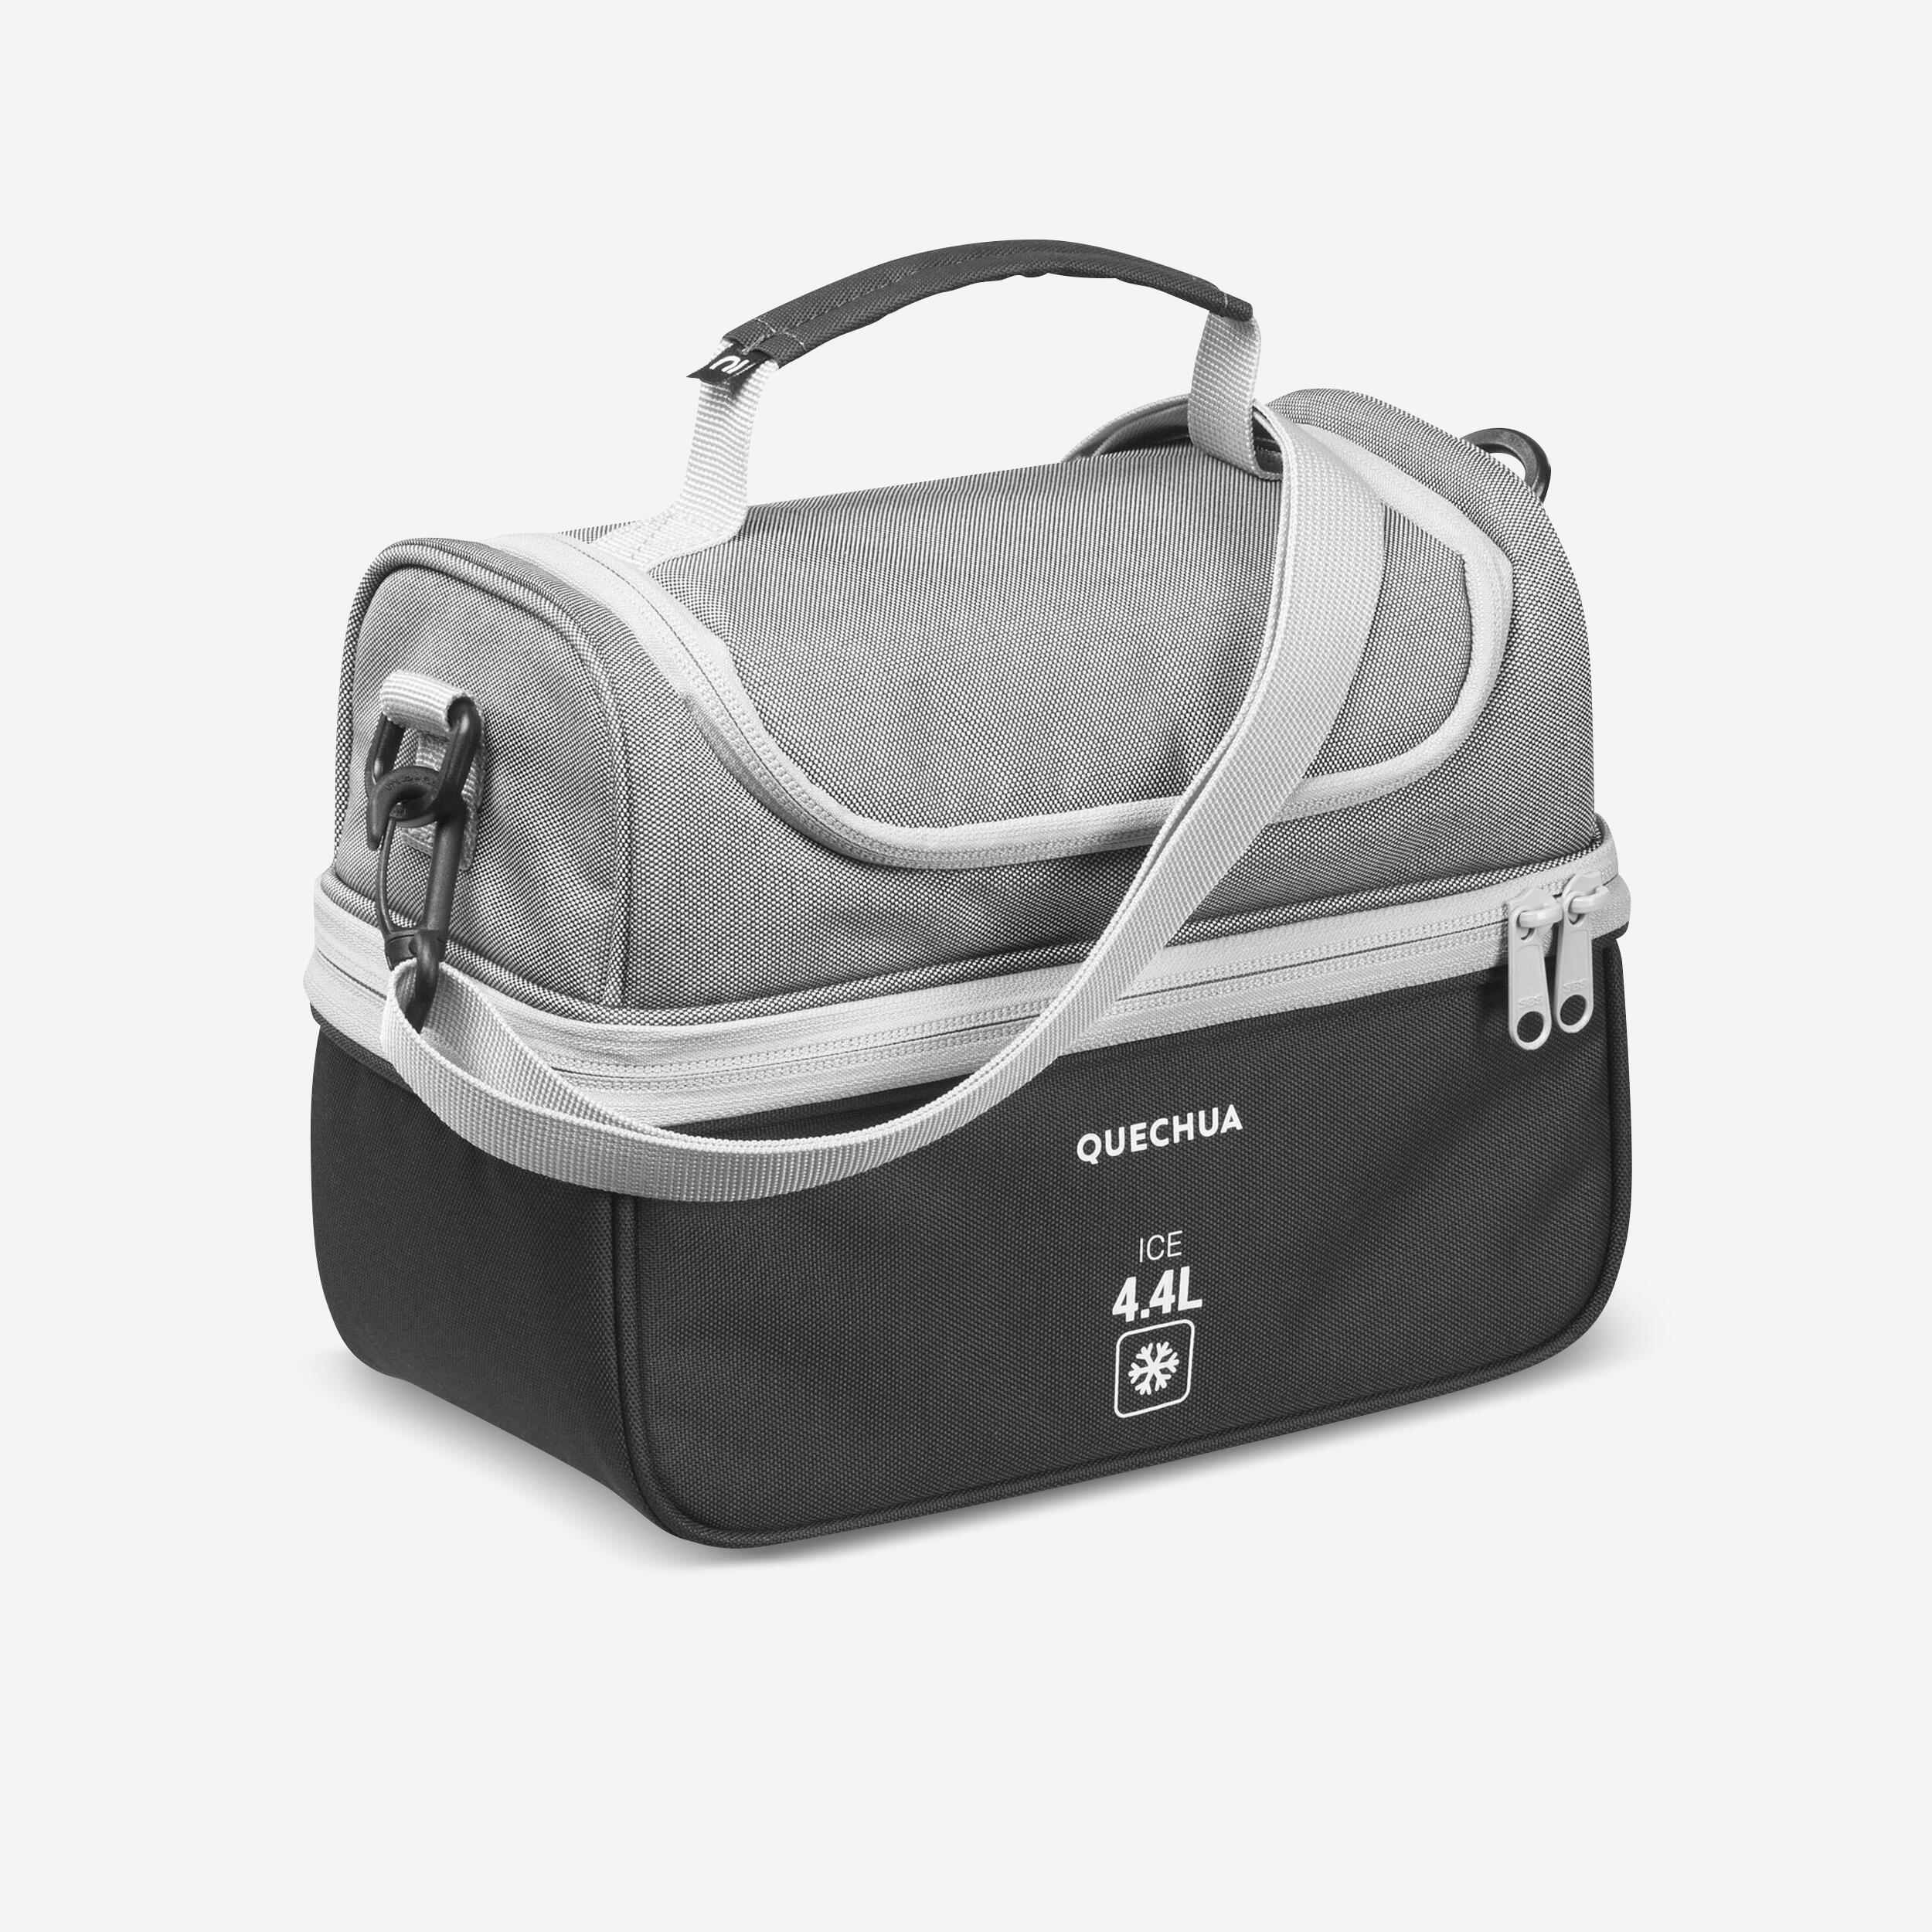 Quechua Insulated Lunch Box 100 - 4.4 Litres - 2 Food Storage Boxes Included